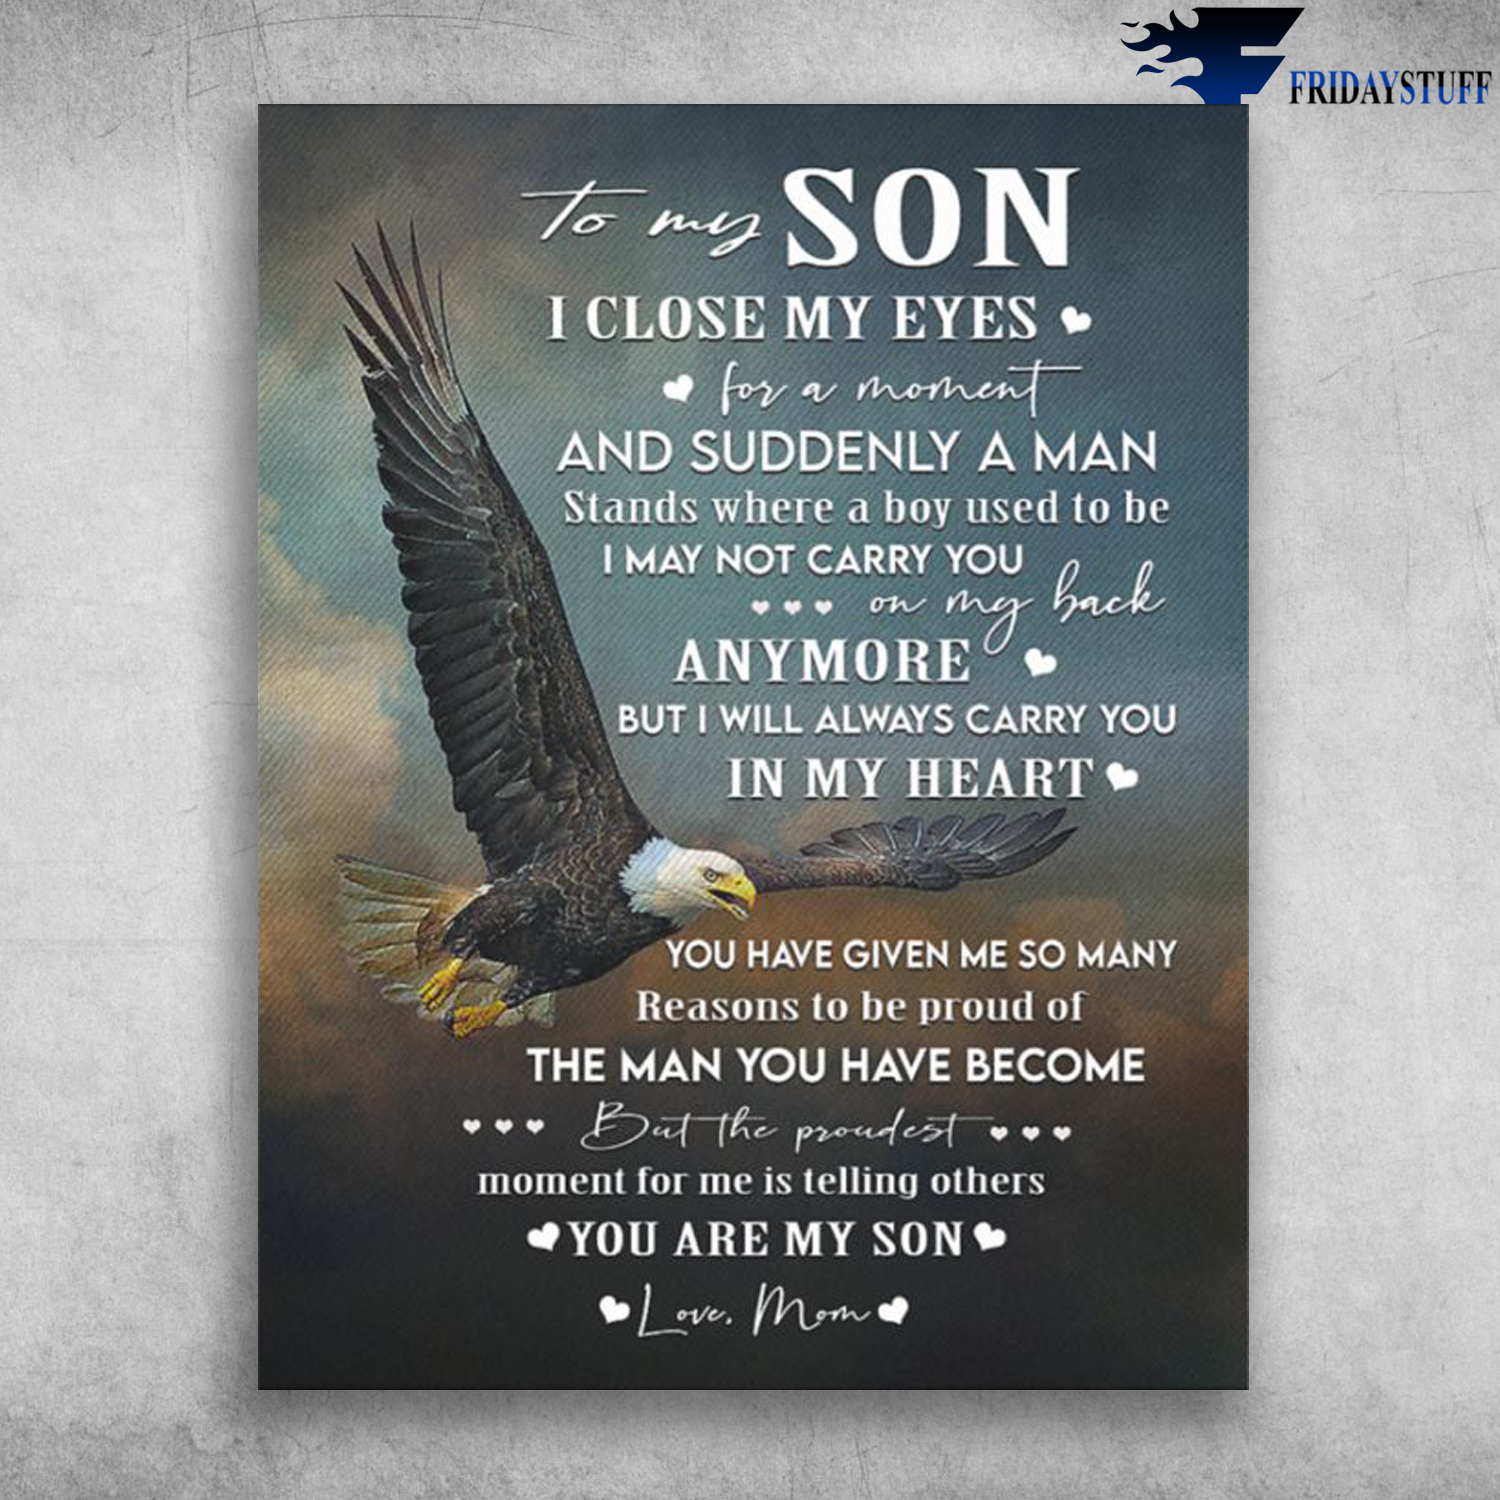 Eagle To My Son I Close My Eyes For A Moment And Suddenly a Man Love, Mom